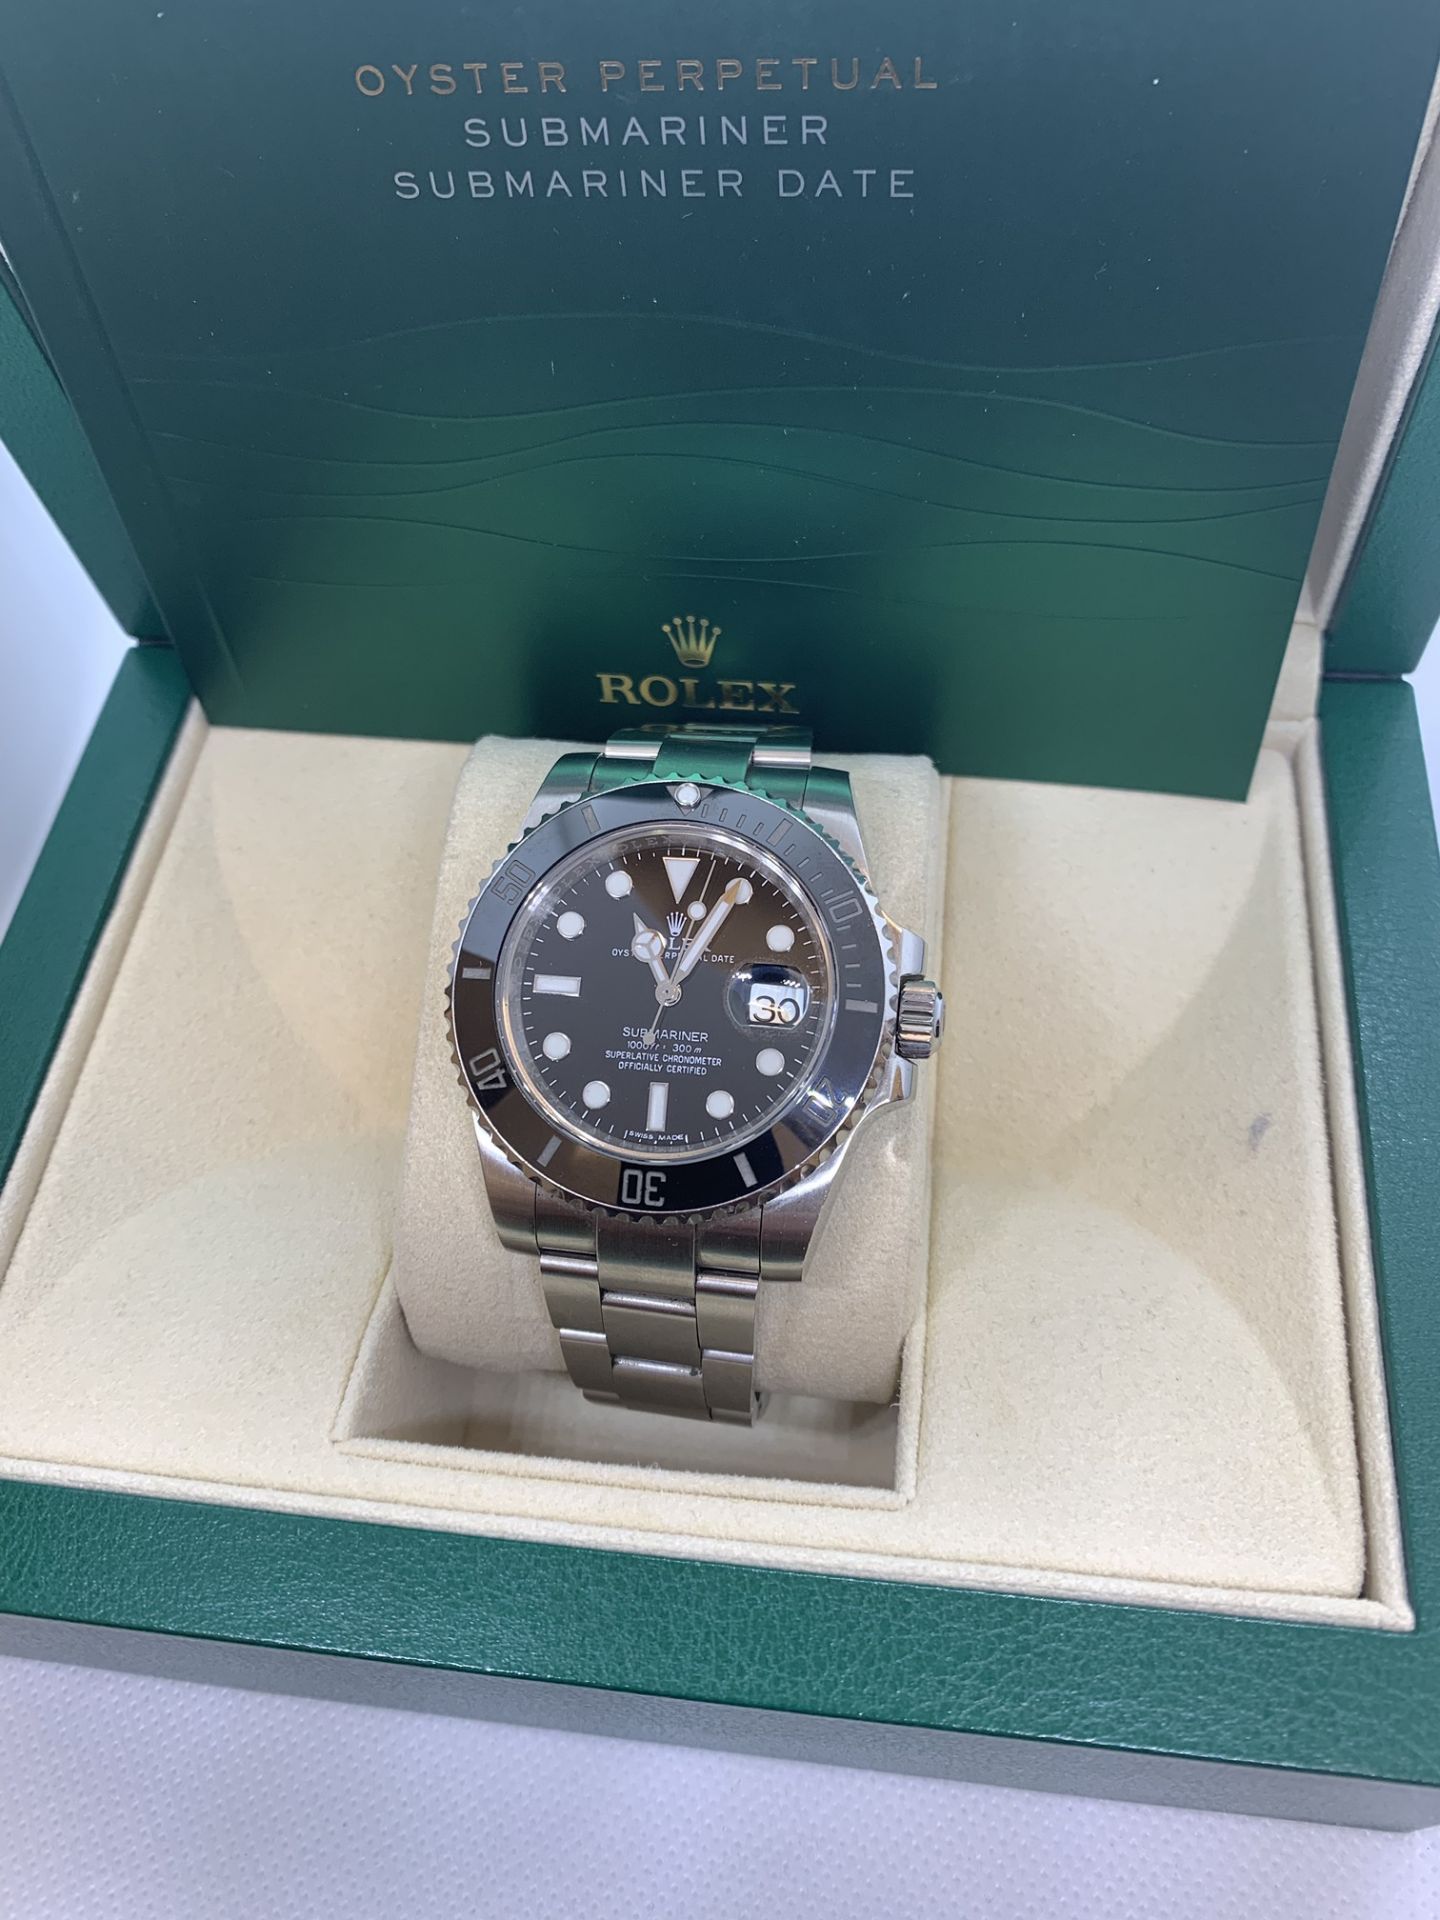 ROLEX SUBMARINER 3135 MOVEMENT WITH S/S METAL WATCH CASE - Image 5 of 13